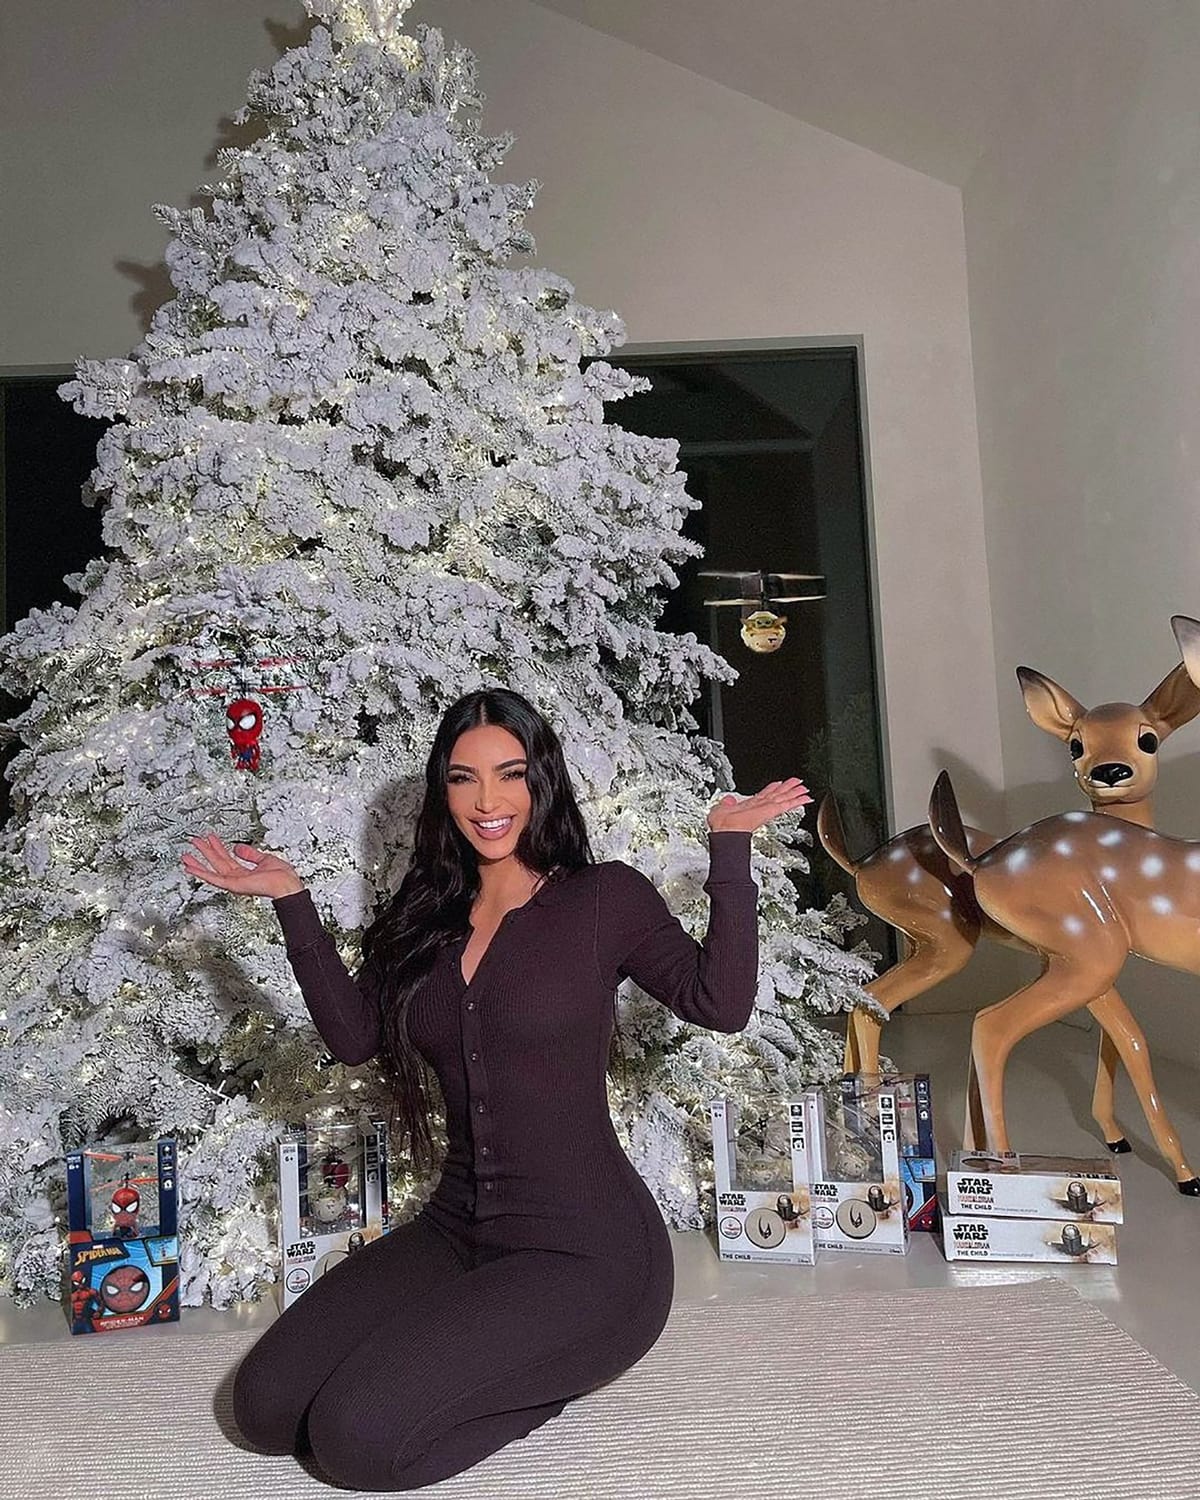 Kim Kardashian in a brown onesie with buttons from Skims posing with a Christmas as she offers parents advice on Christmas shopping for kids' presents